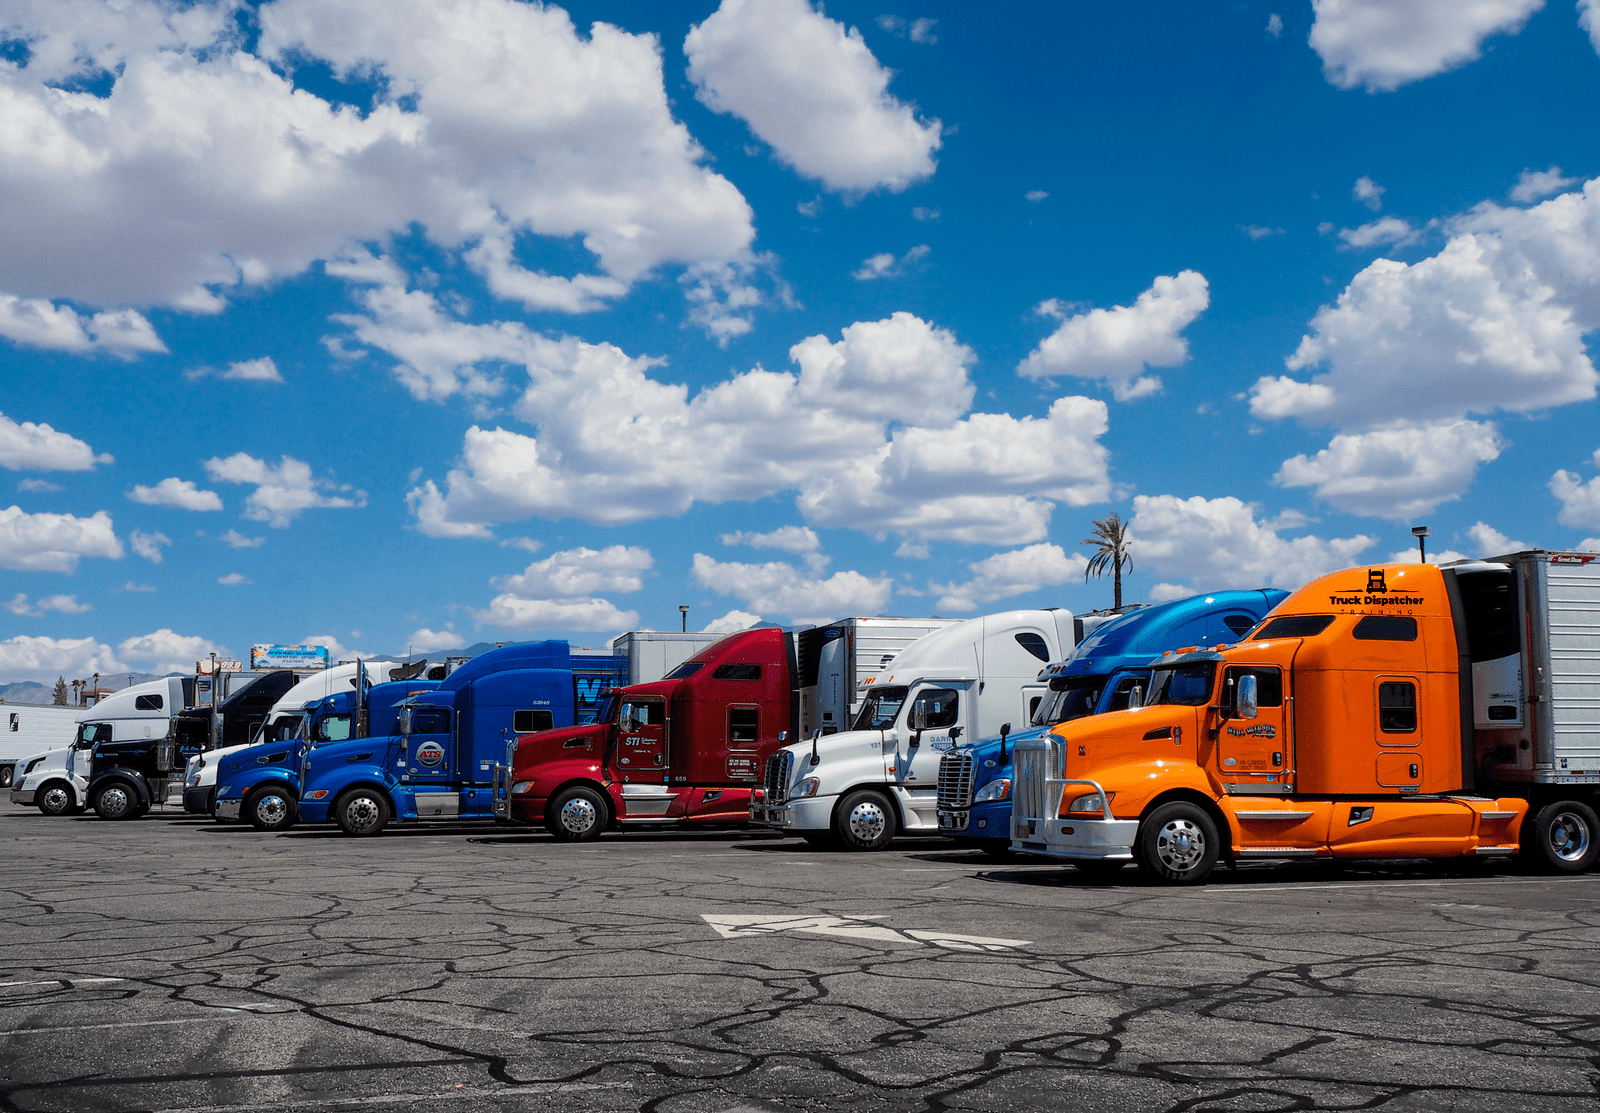 Truck Parking in the U.S.: Is It Really That Bad?